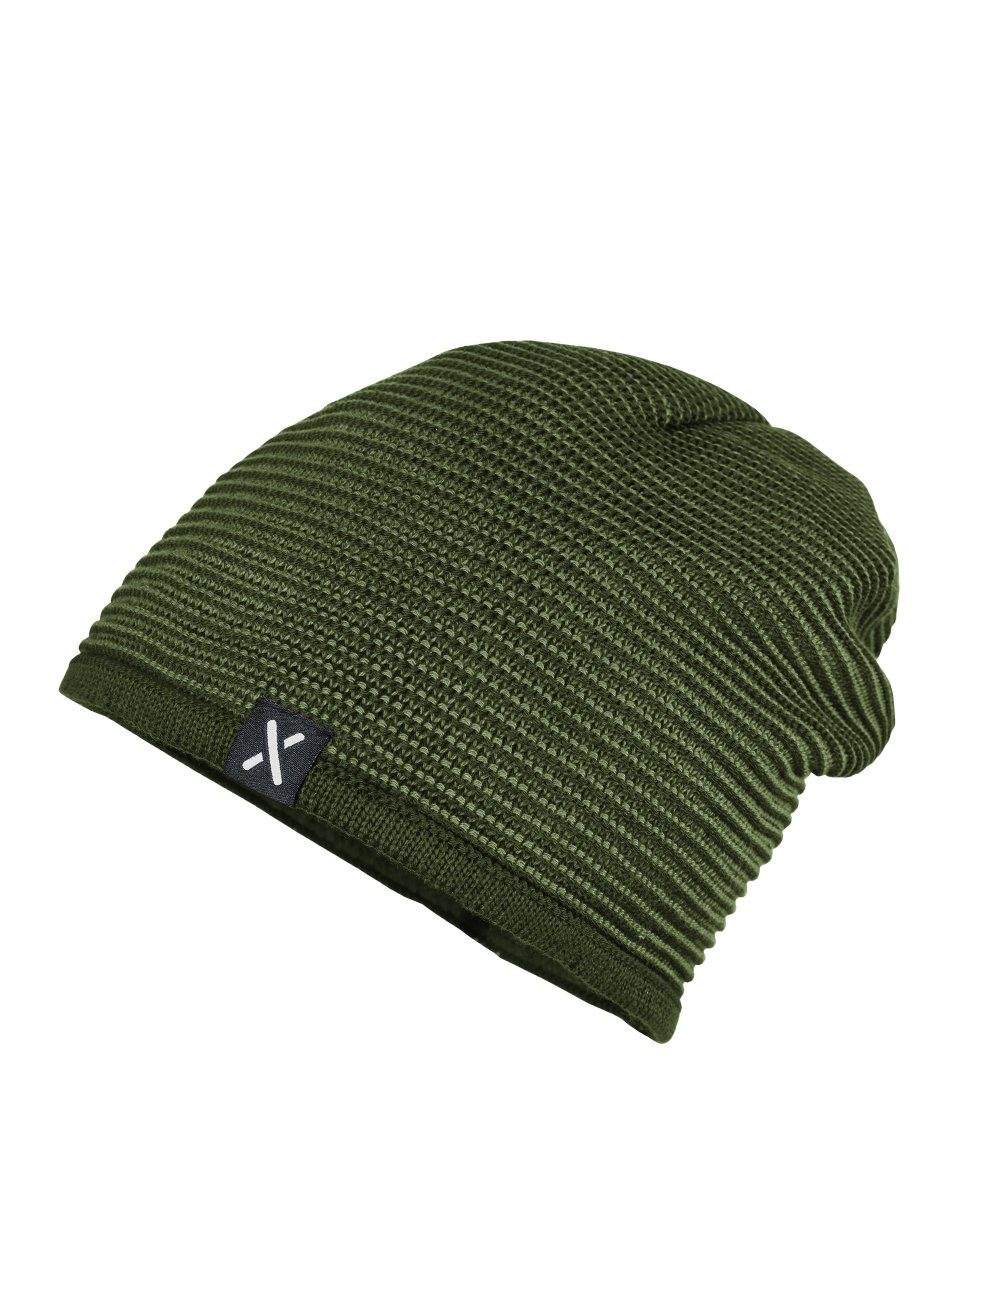 dunkelkhaki/chive middle KIDS-Beanie in MAXIMO Strickmütze Germany Made